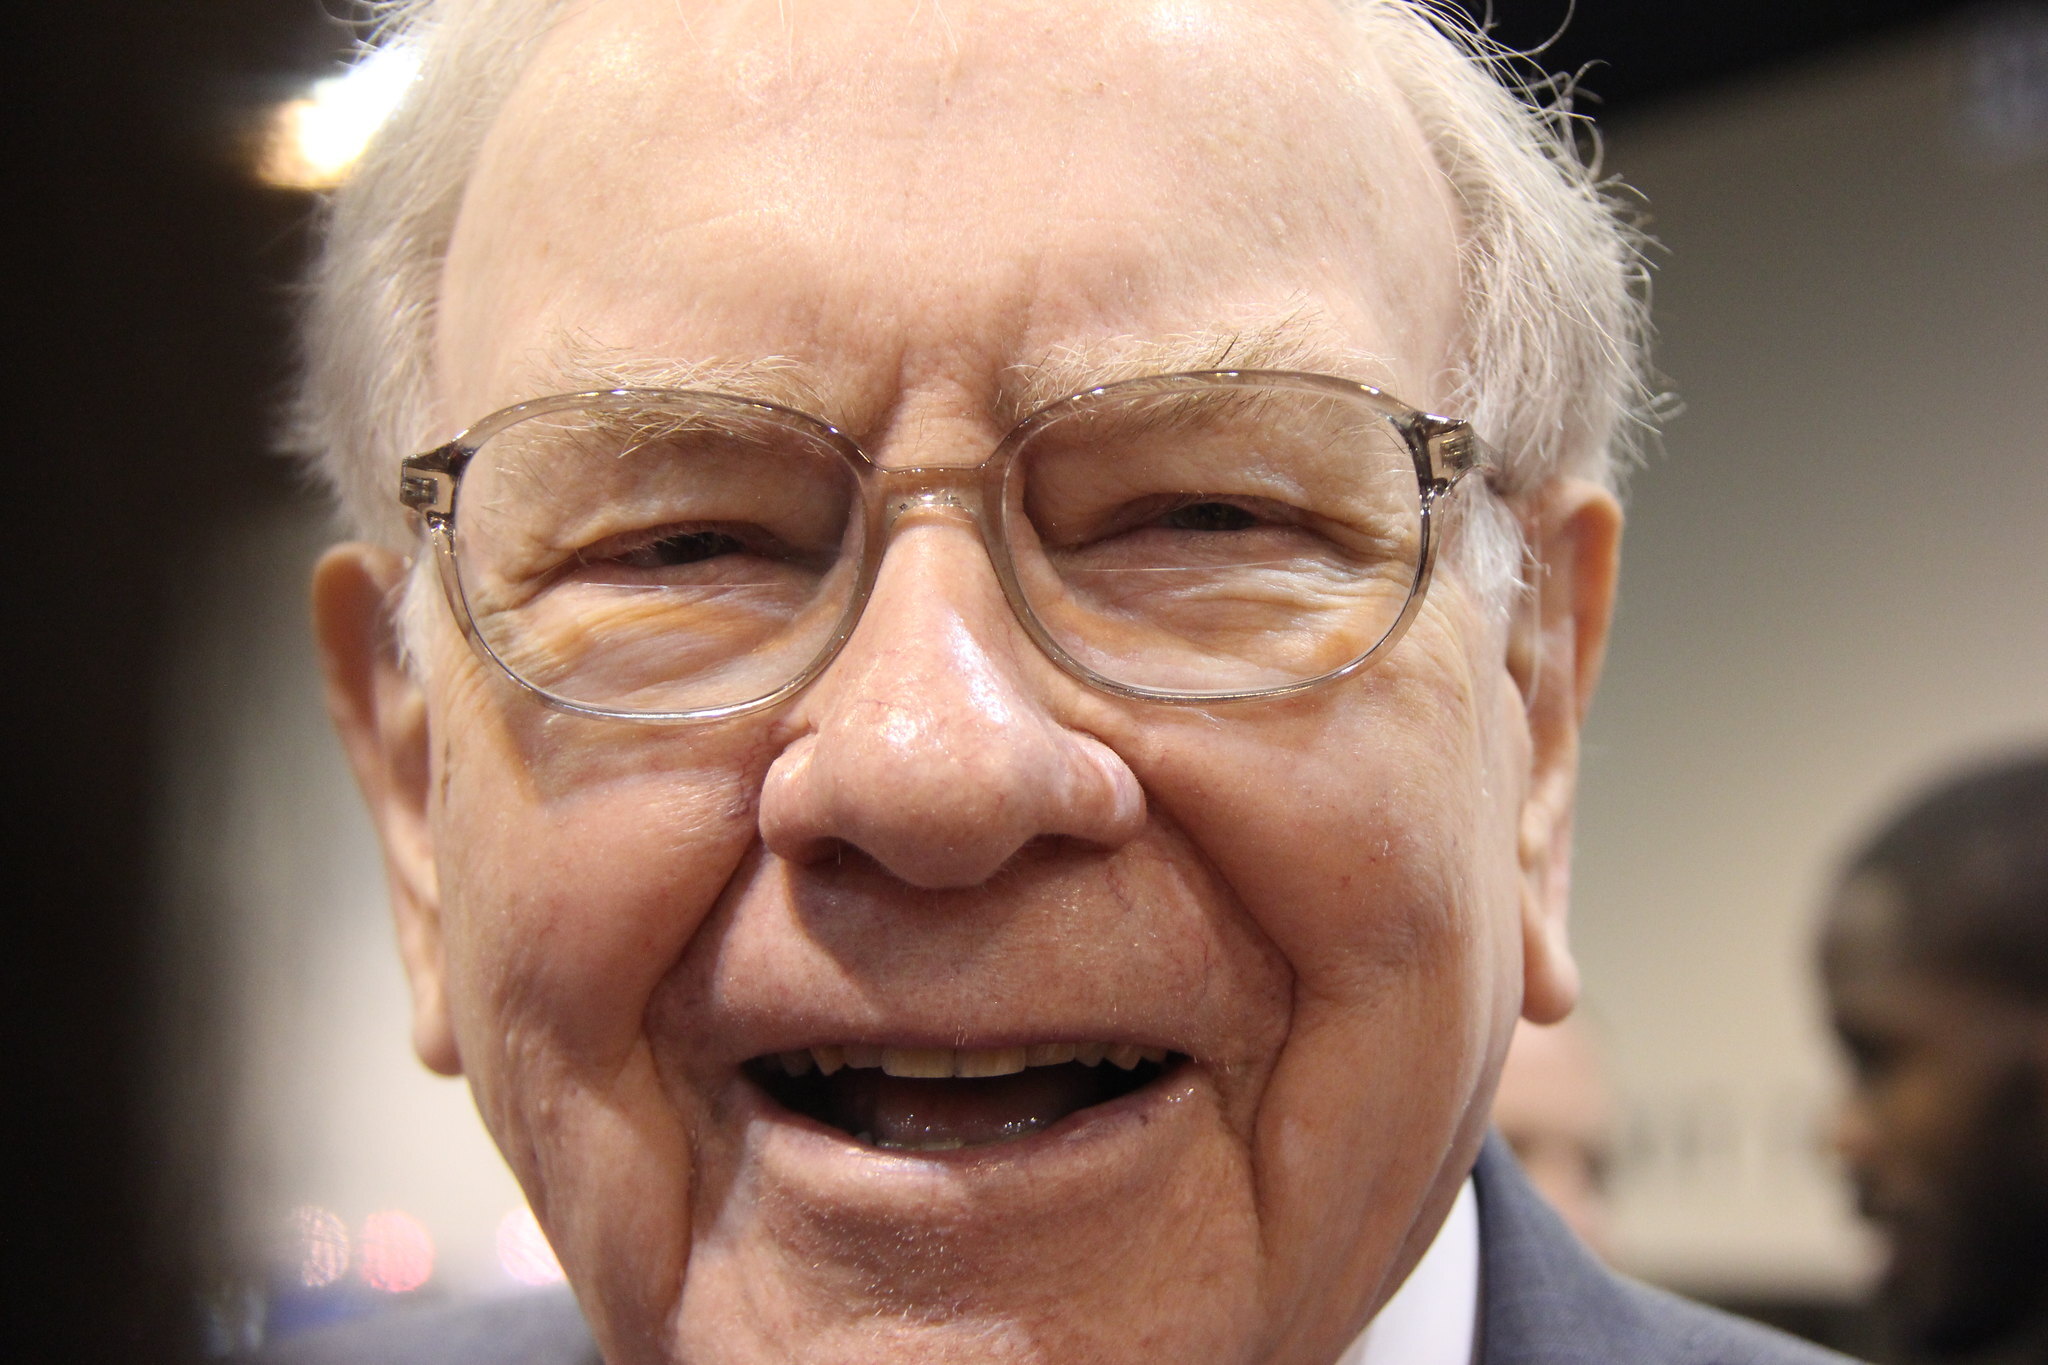 Warren Buffett''s Latest $4.4 Billion Buy Brings His Total Investment in This Stock to $70 Billion in Under 5 Years